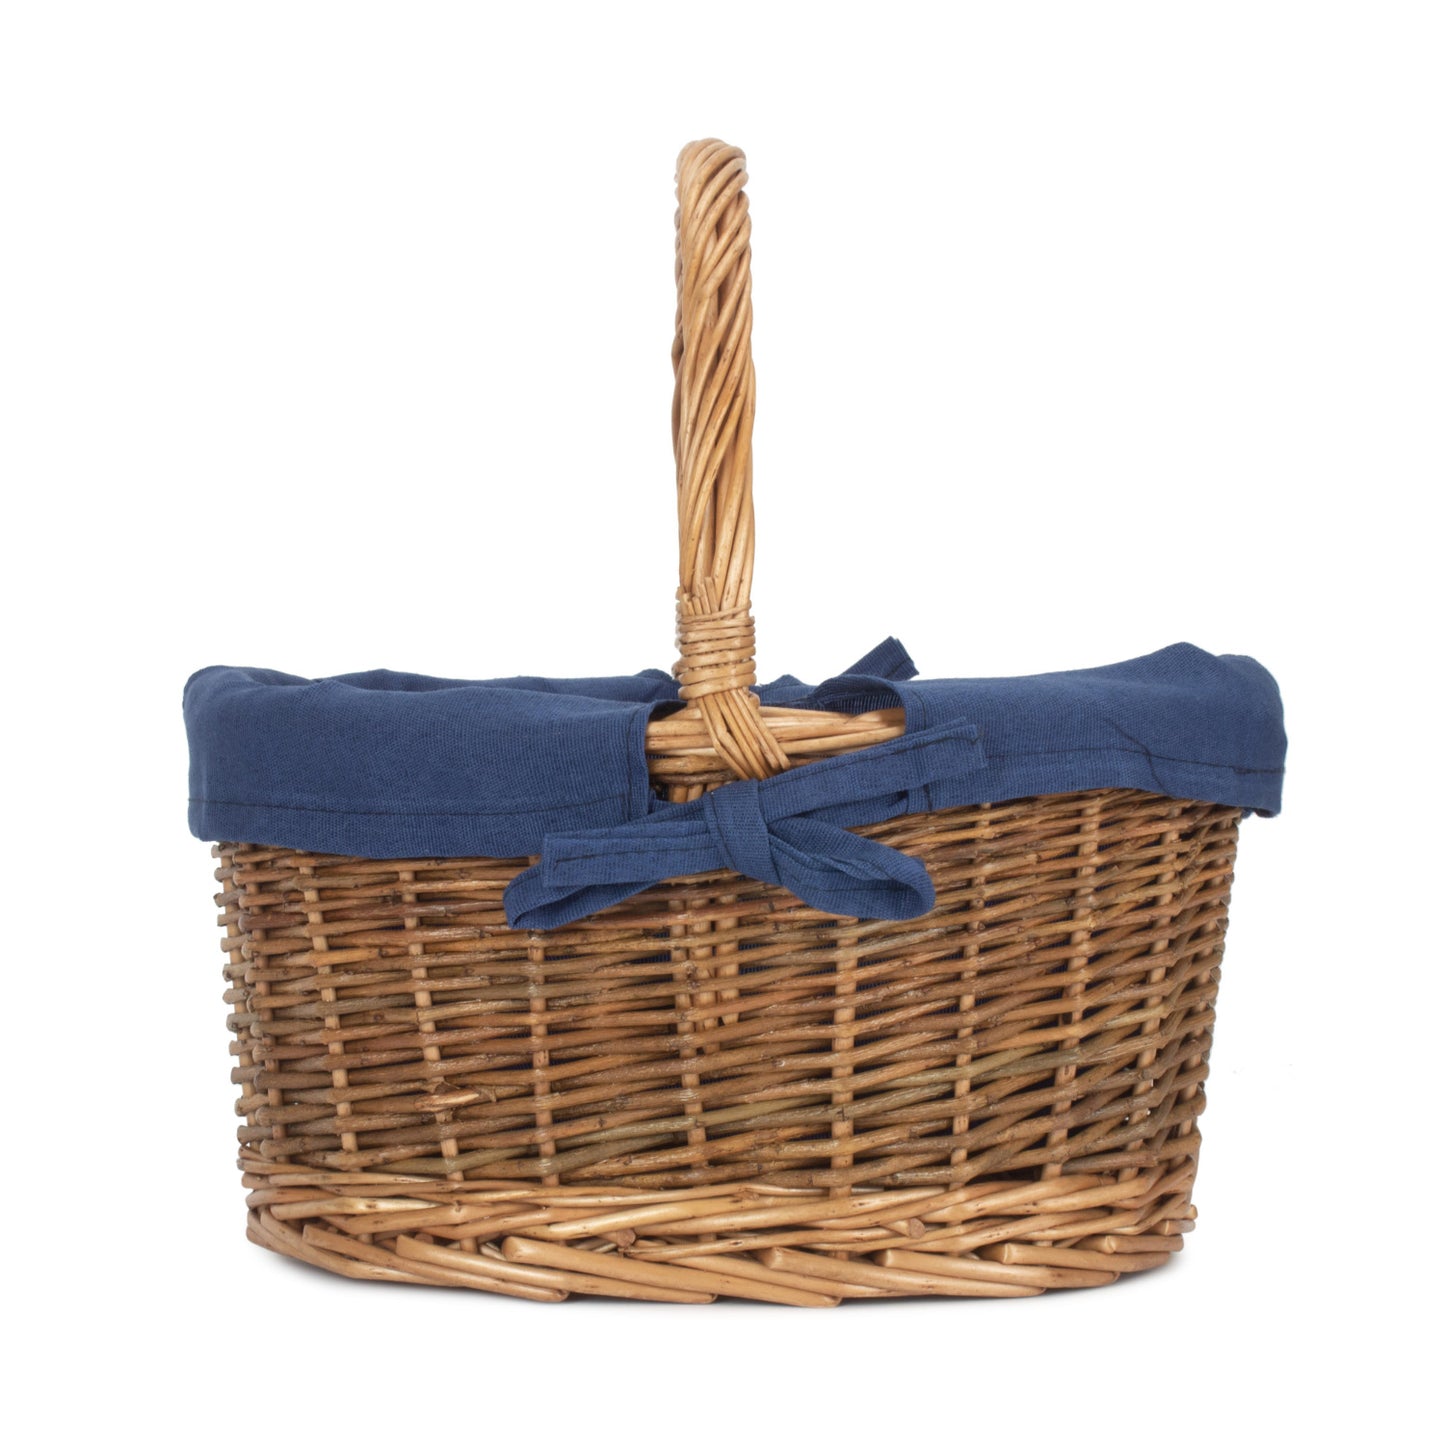 Child's Country Oval Shopper With Navy Blue Lining